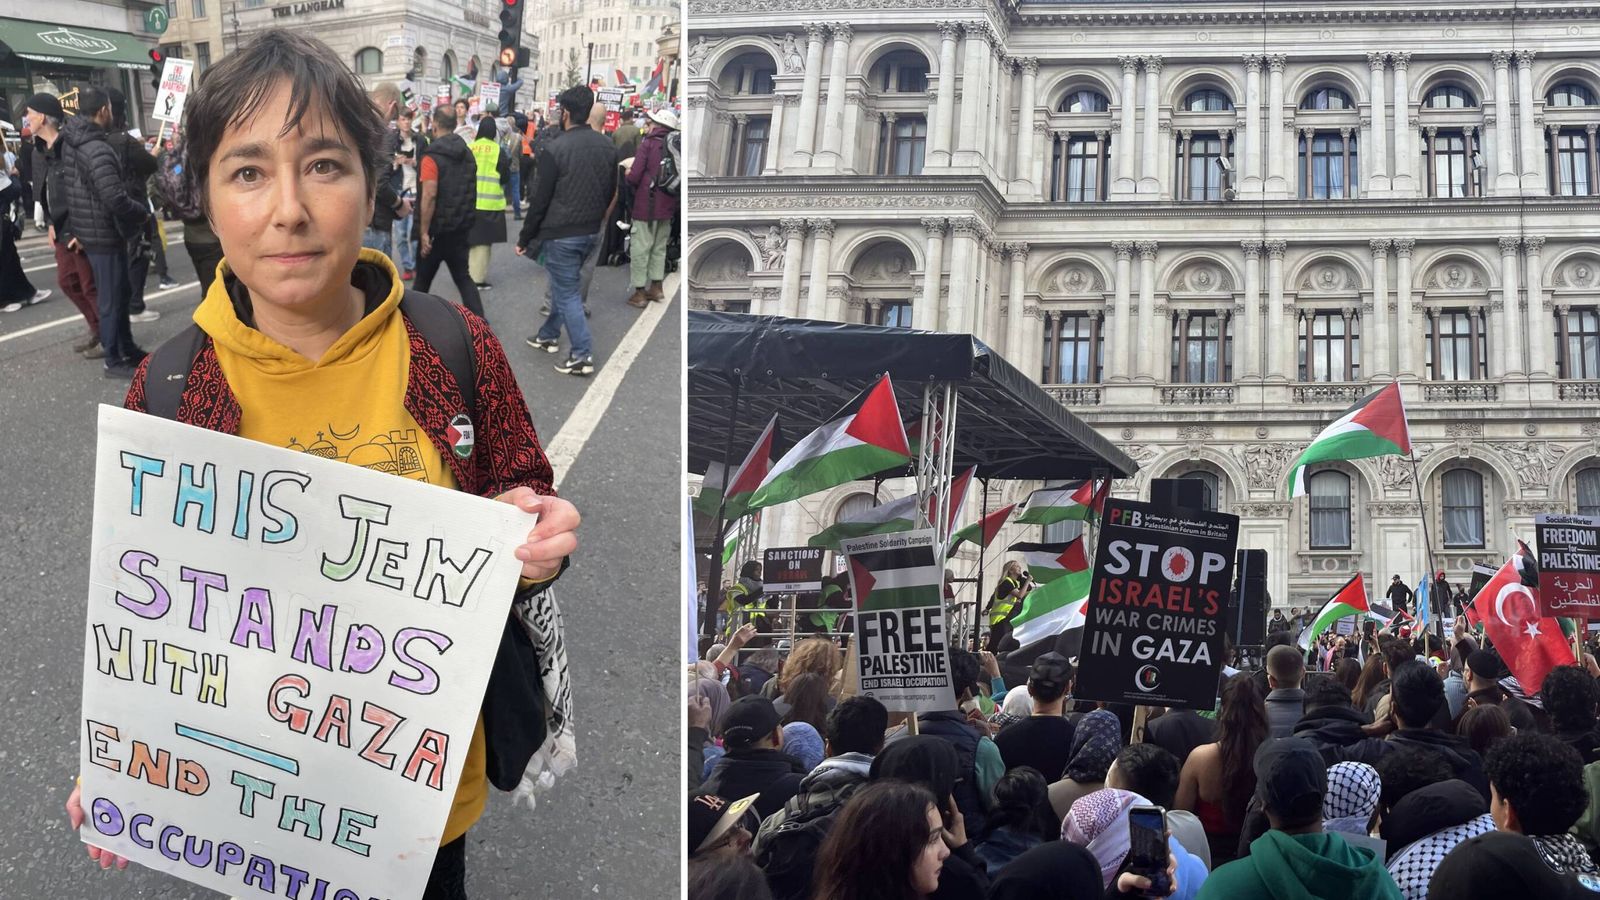 'This Jew stands with Gaza': Messages of peace and pockets of unrest at London protest